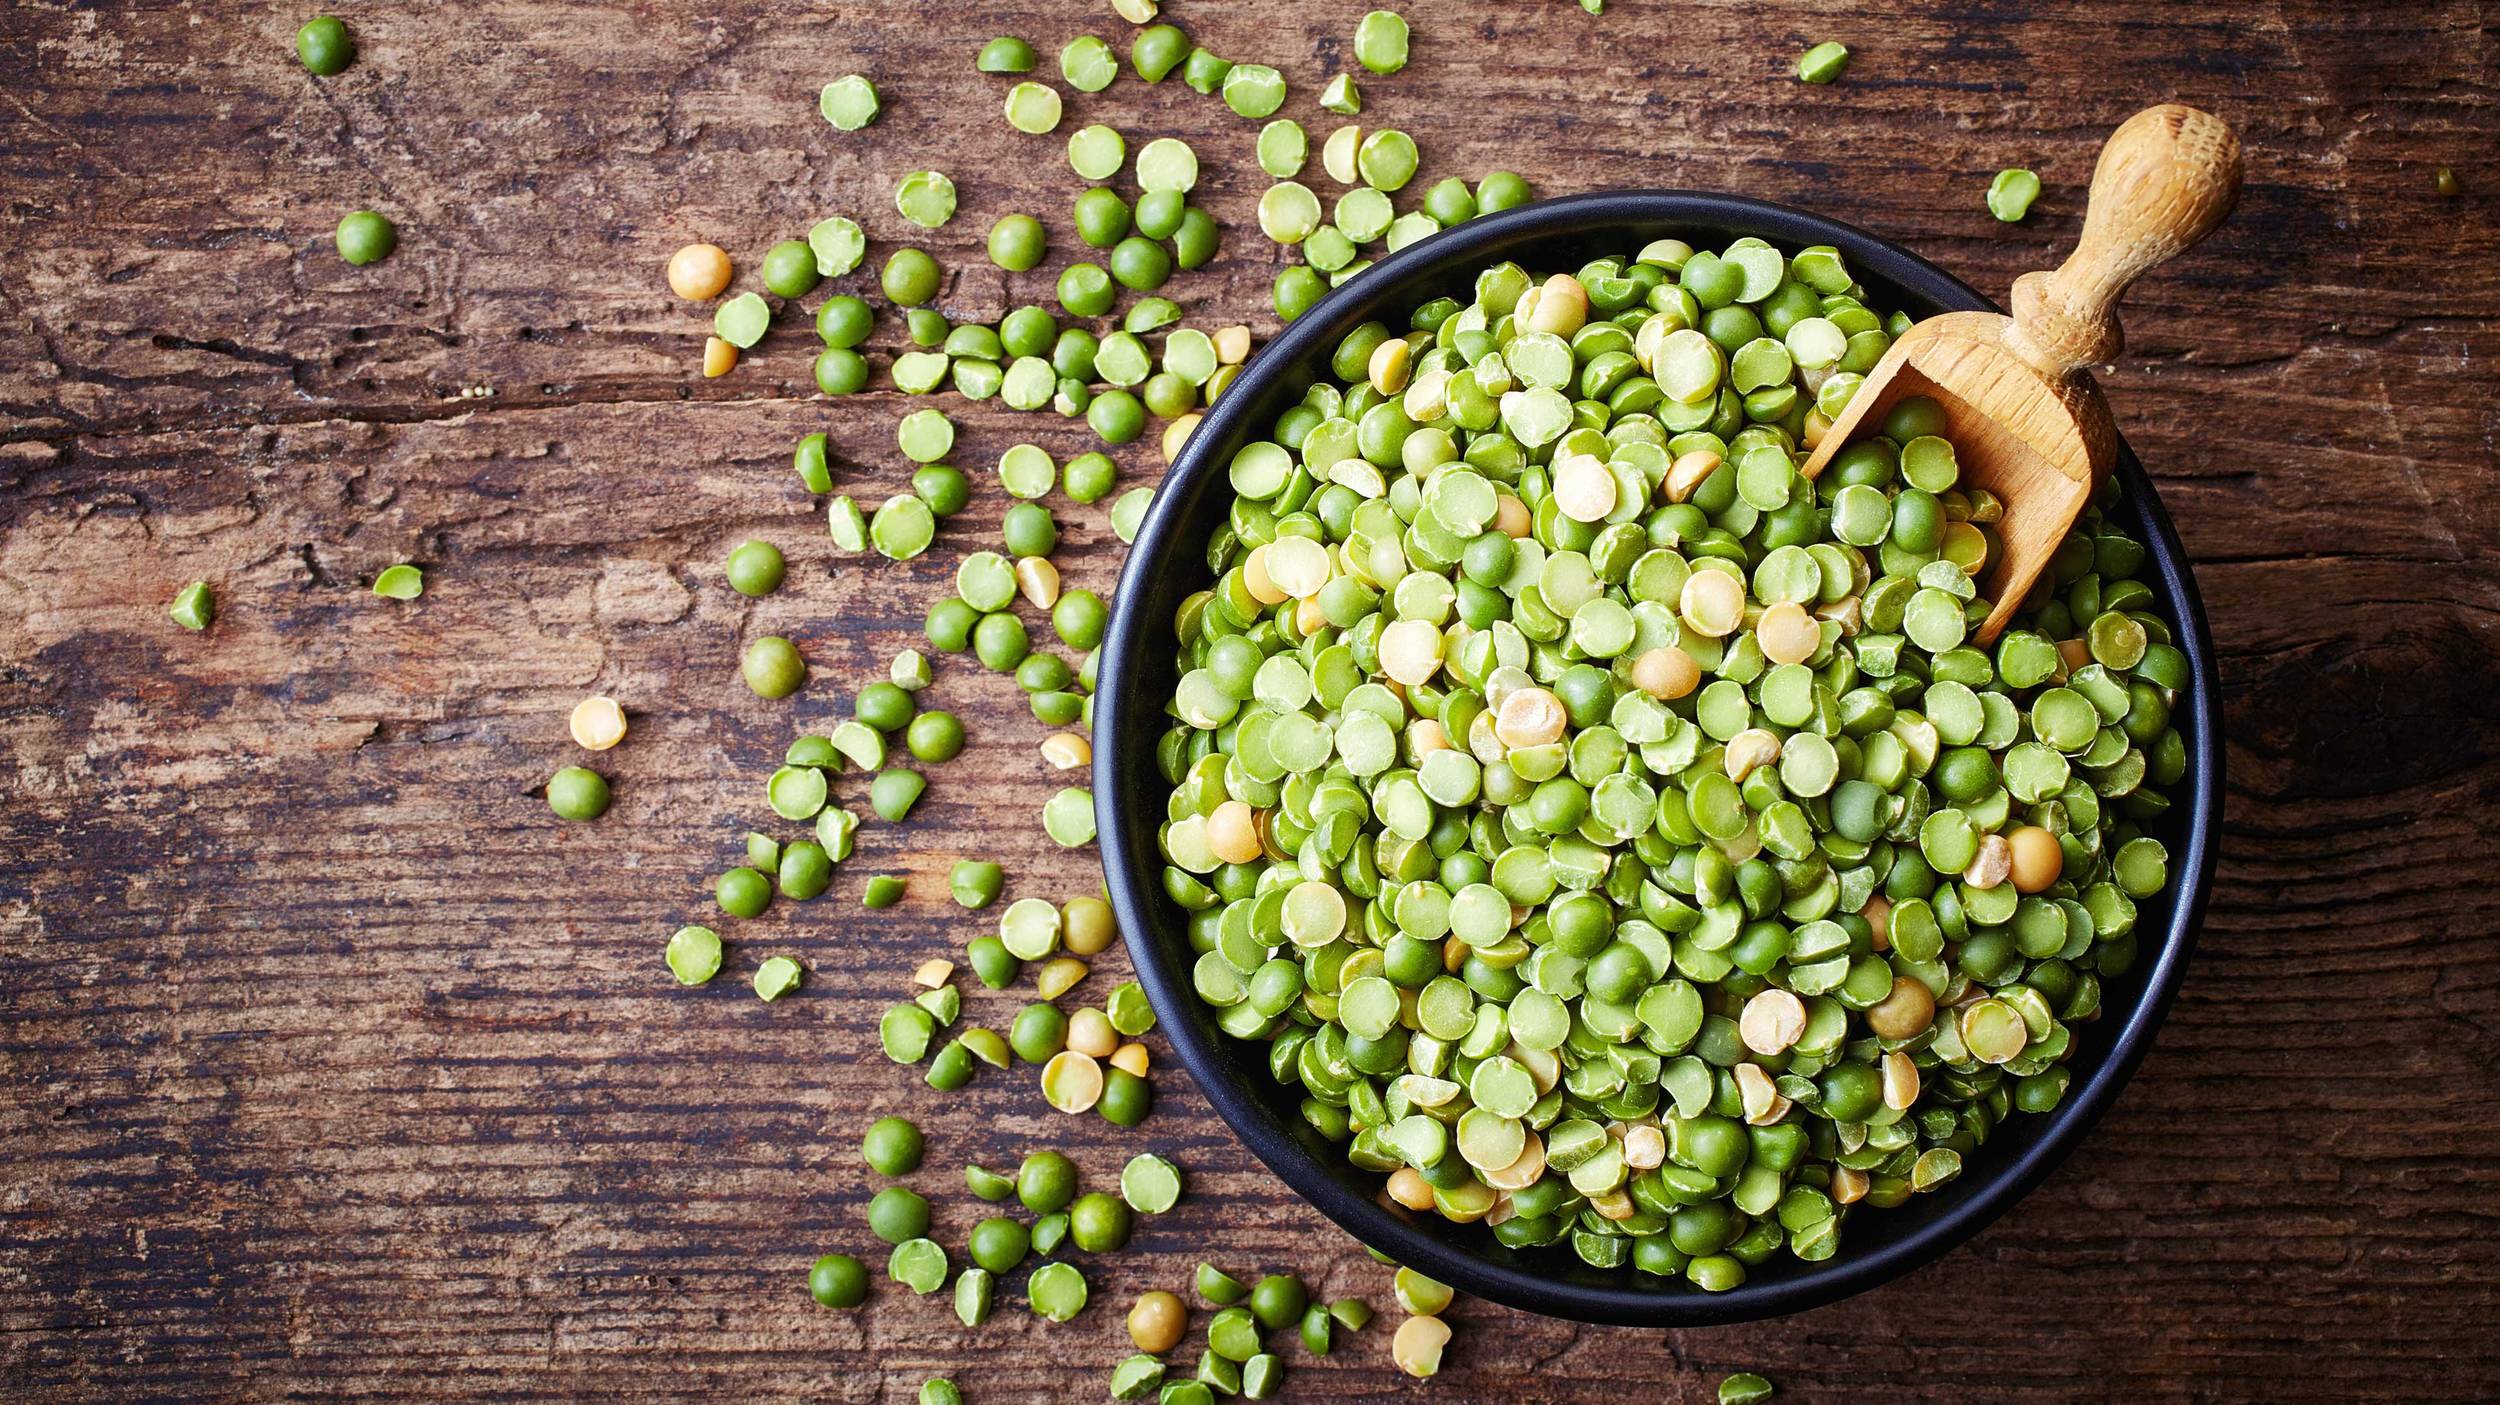 Dry peas are the ideal food for a healthy and balanced diet.